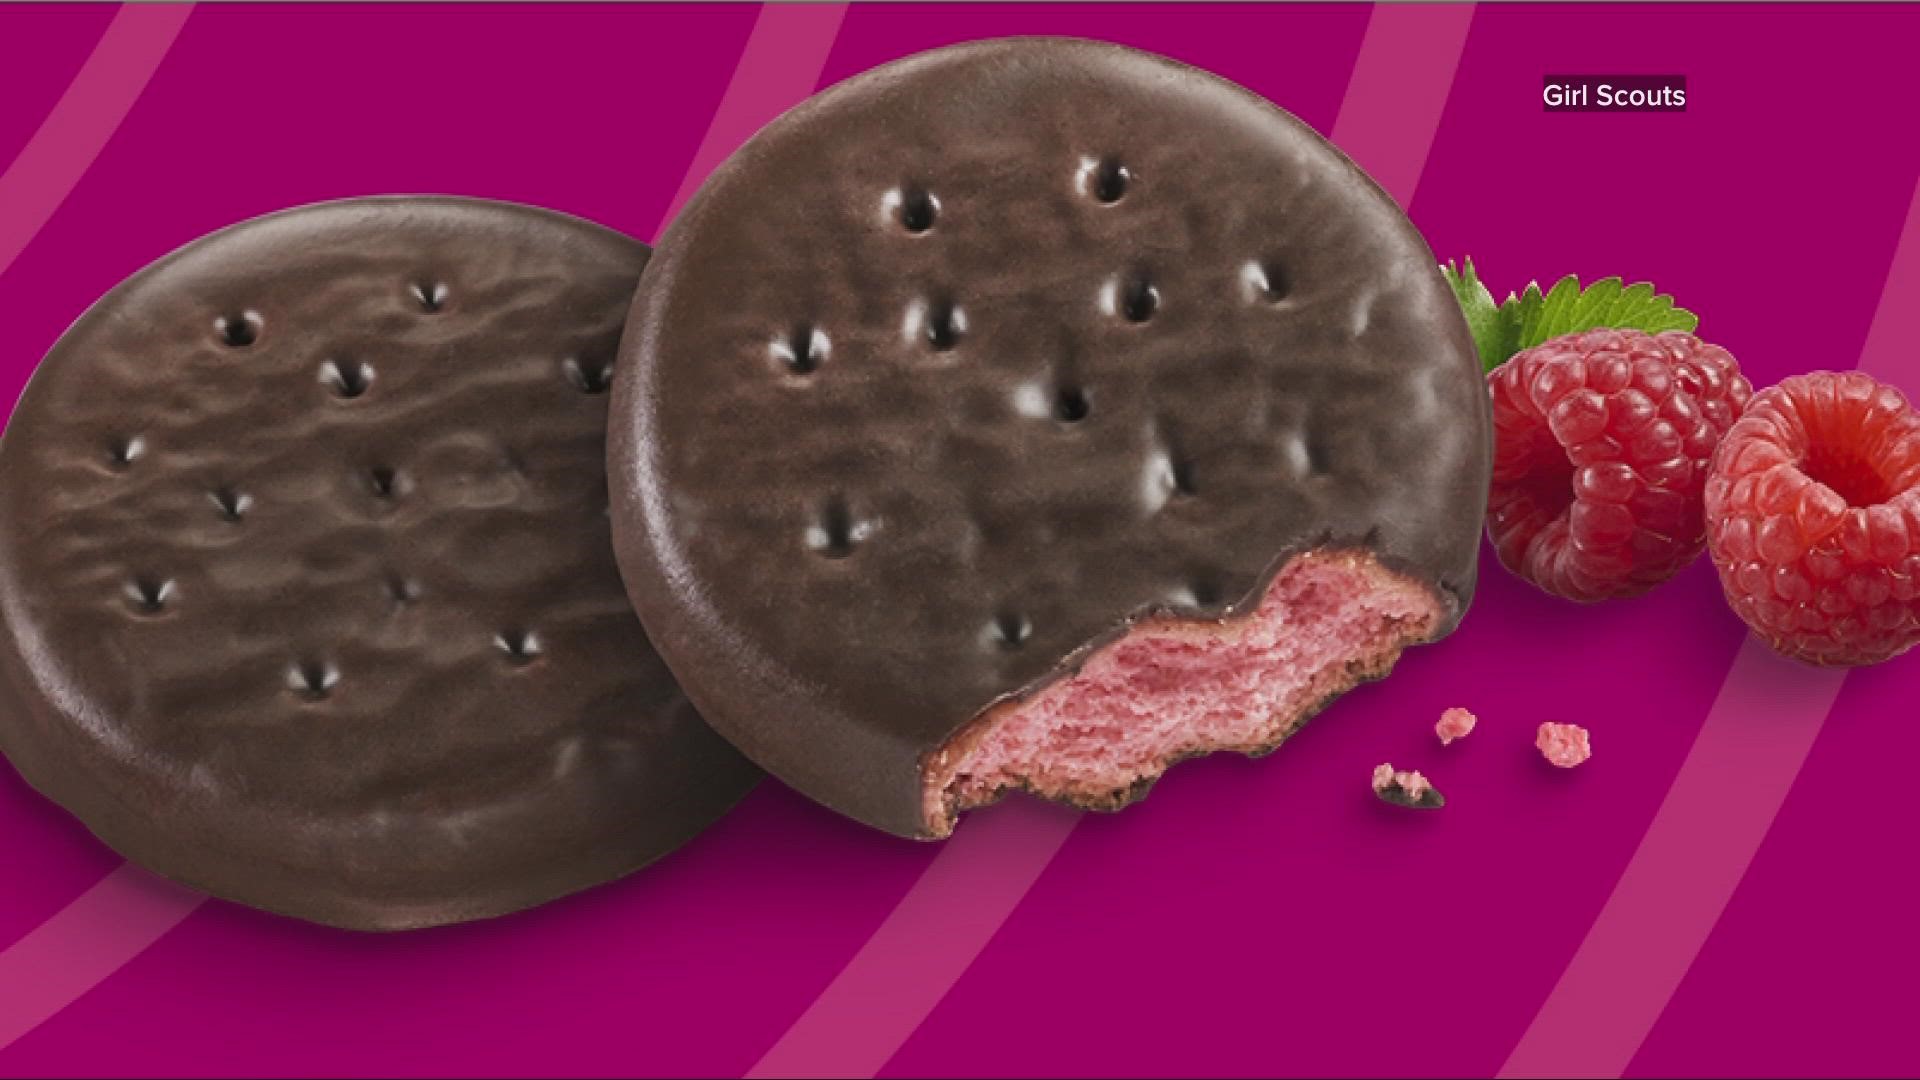 The Girl Scouts revealed a new cookie known as Raspberry Rally, and it's being described as a 'sister' cookie to Thin Mints.